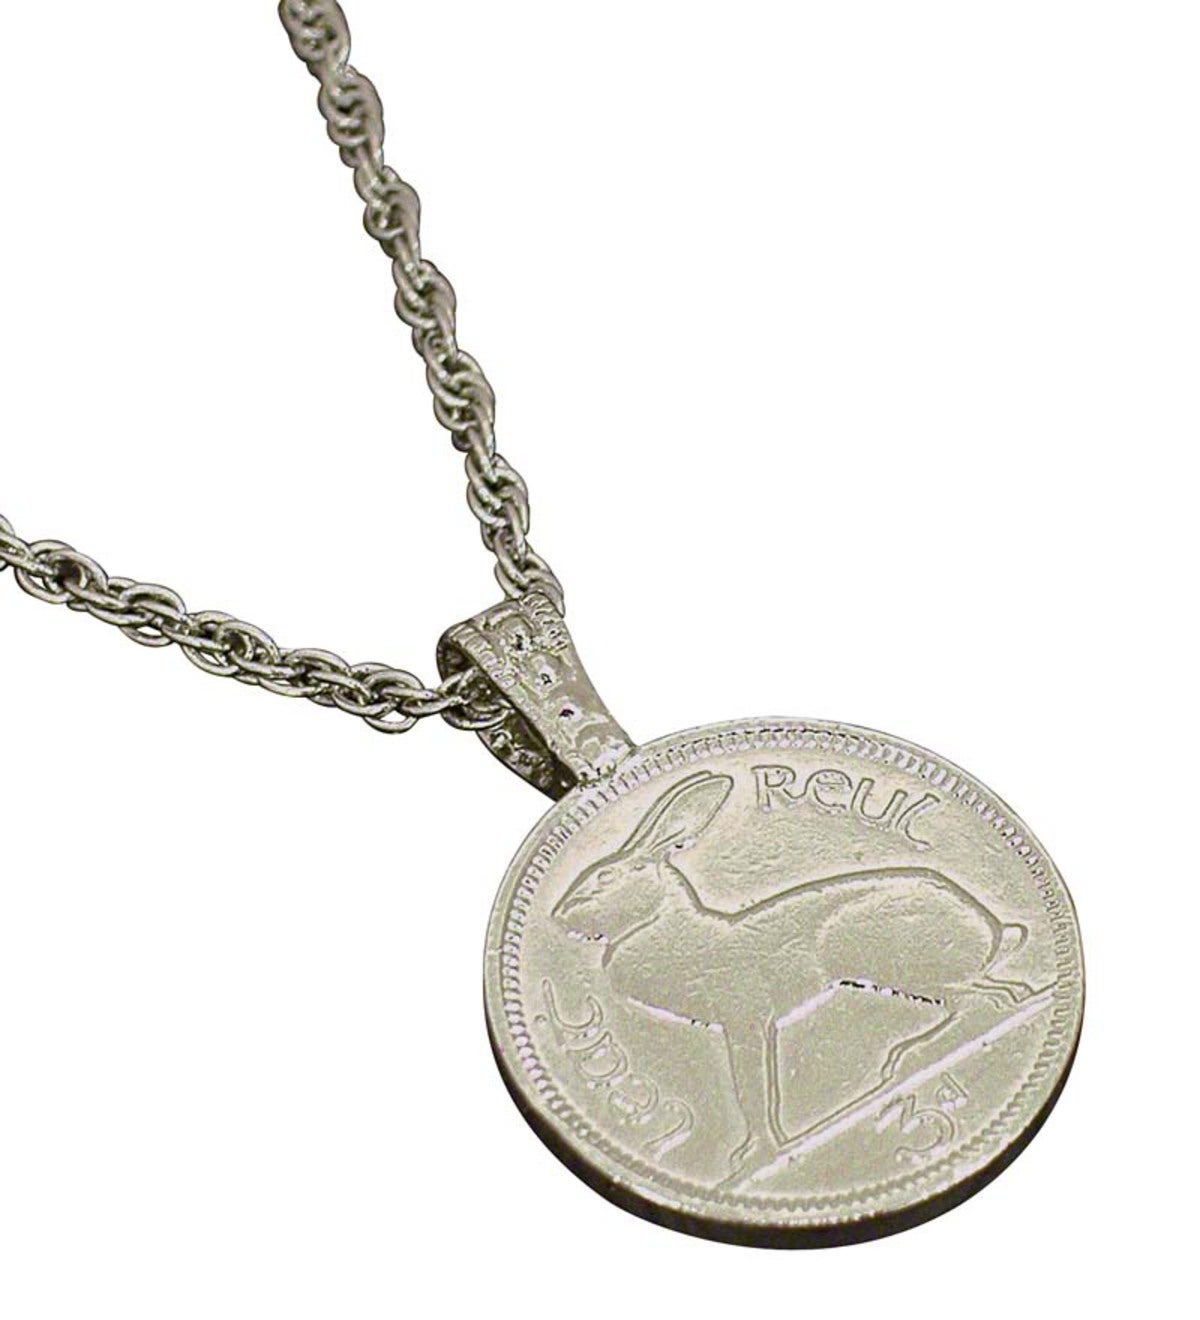 1964 IRISH LUCKY RABBIT COIN PENDANT on a 24"  925 STERLING SILVER Chain